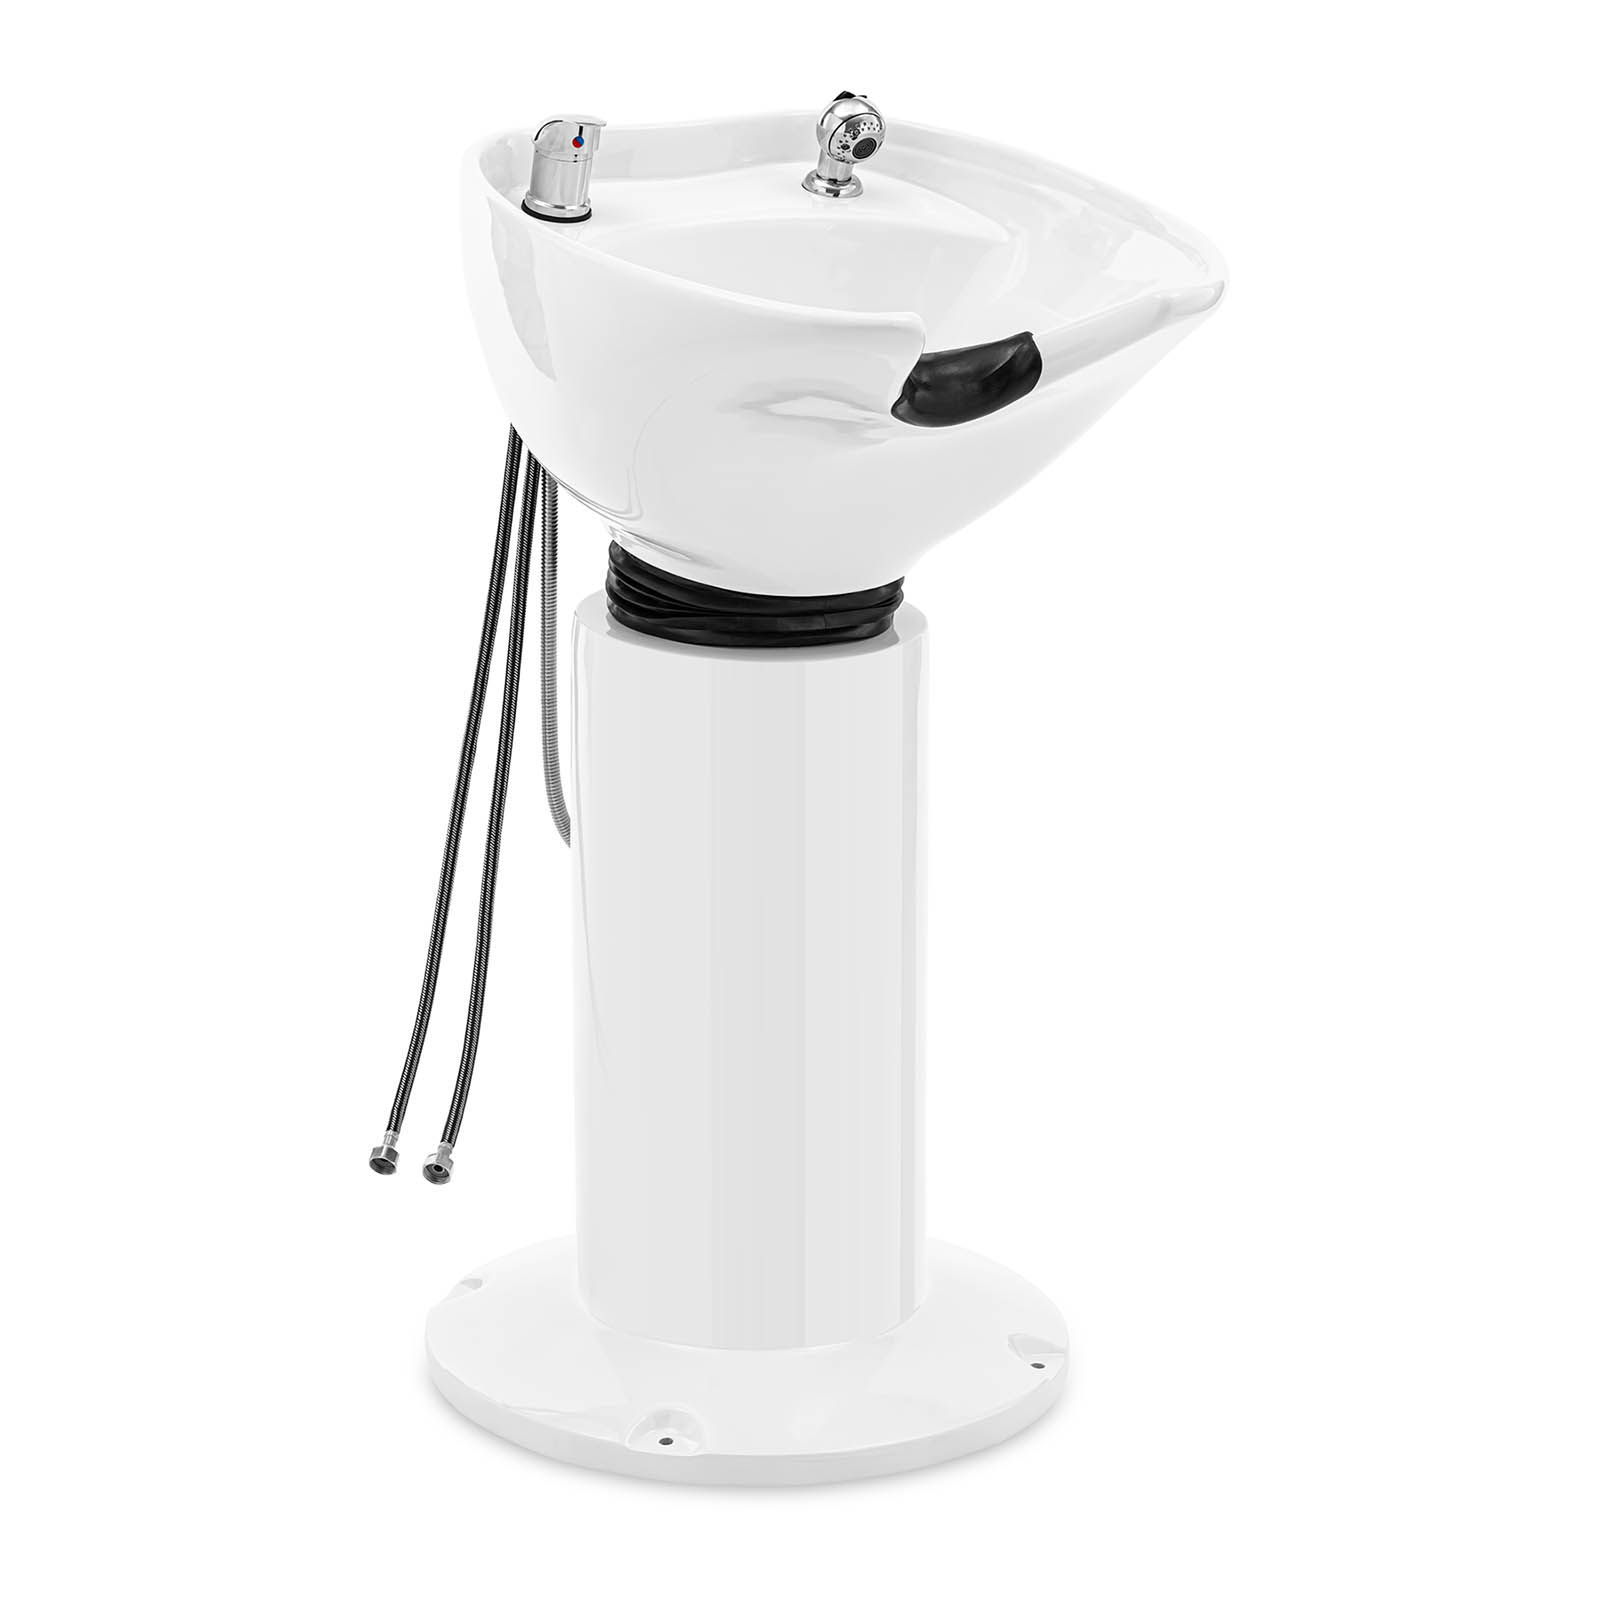 Hairdresser's washbasin - inclinable - with mixer tap, hose and showerhead